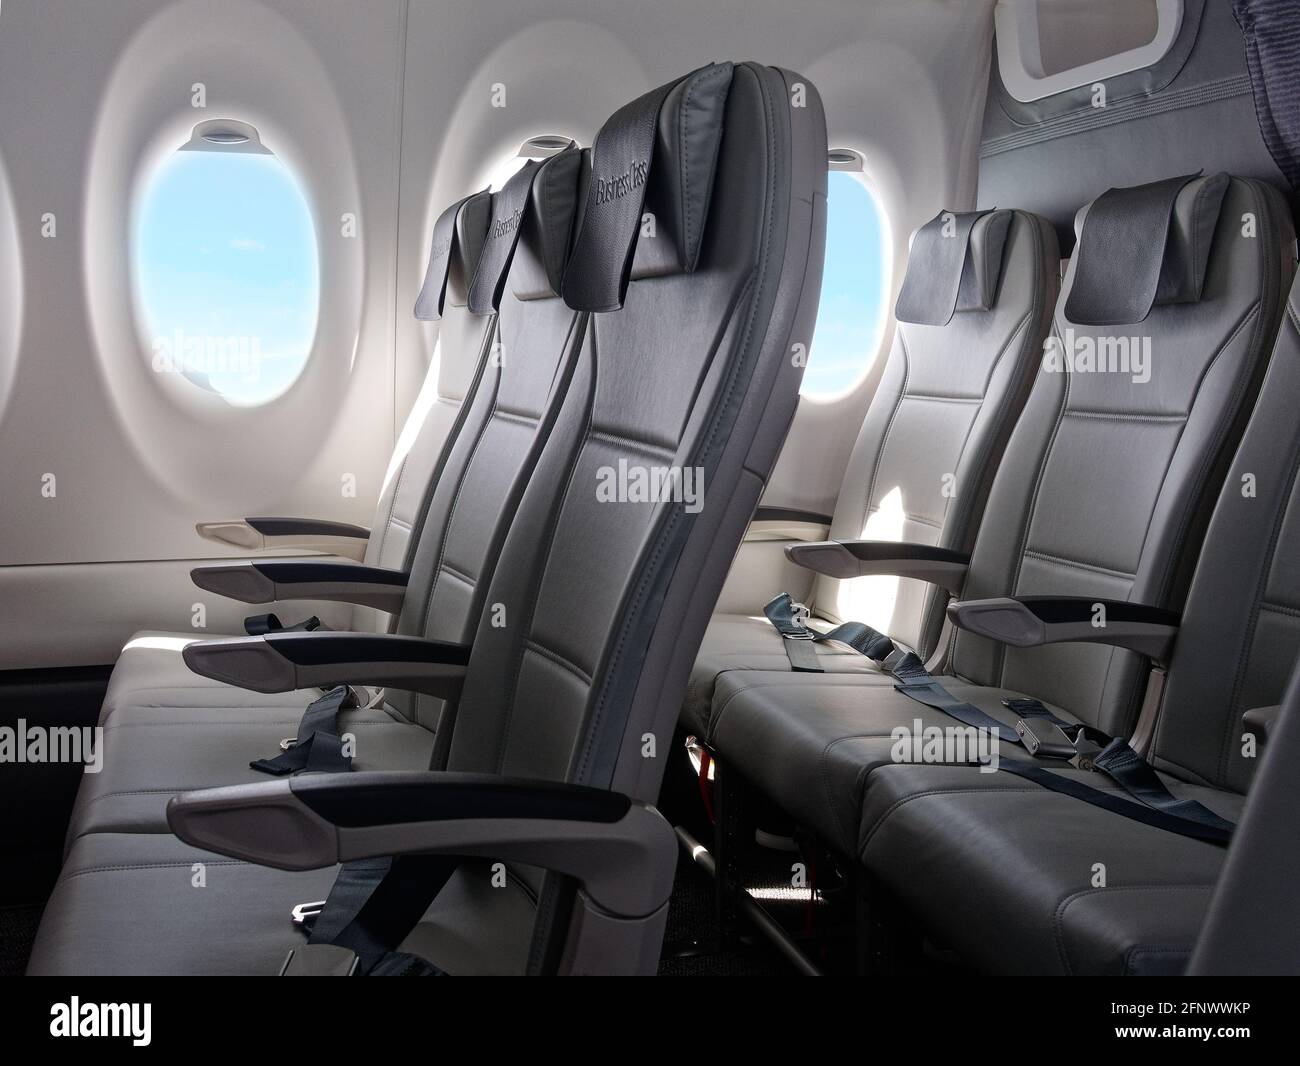 business class seats on the airplane vacant Stock Photo